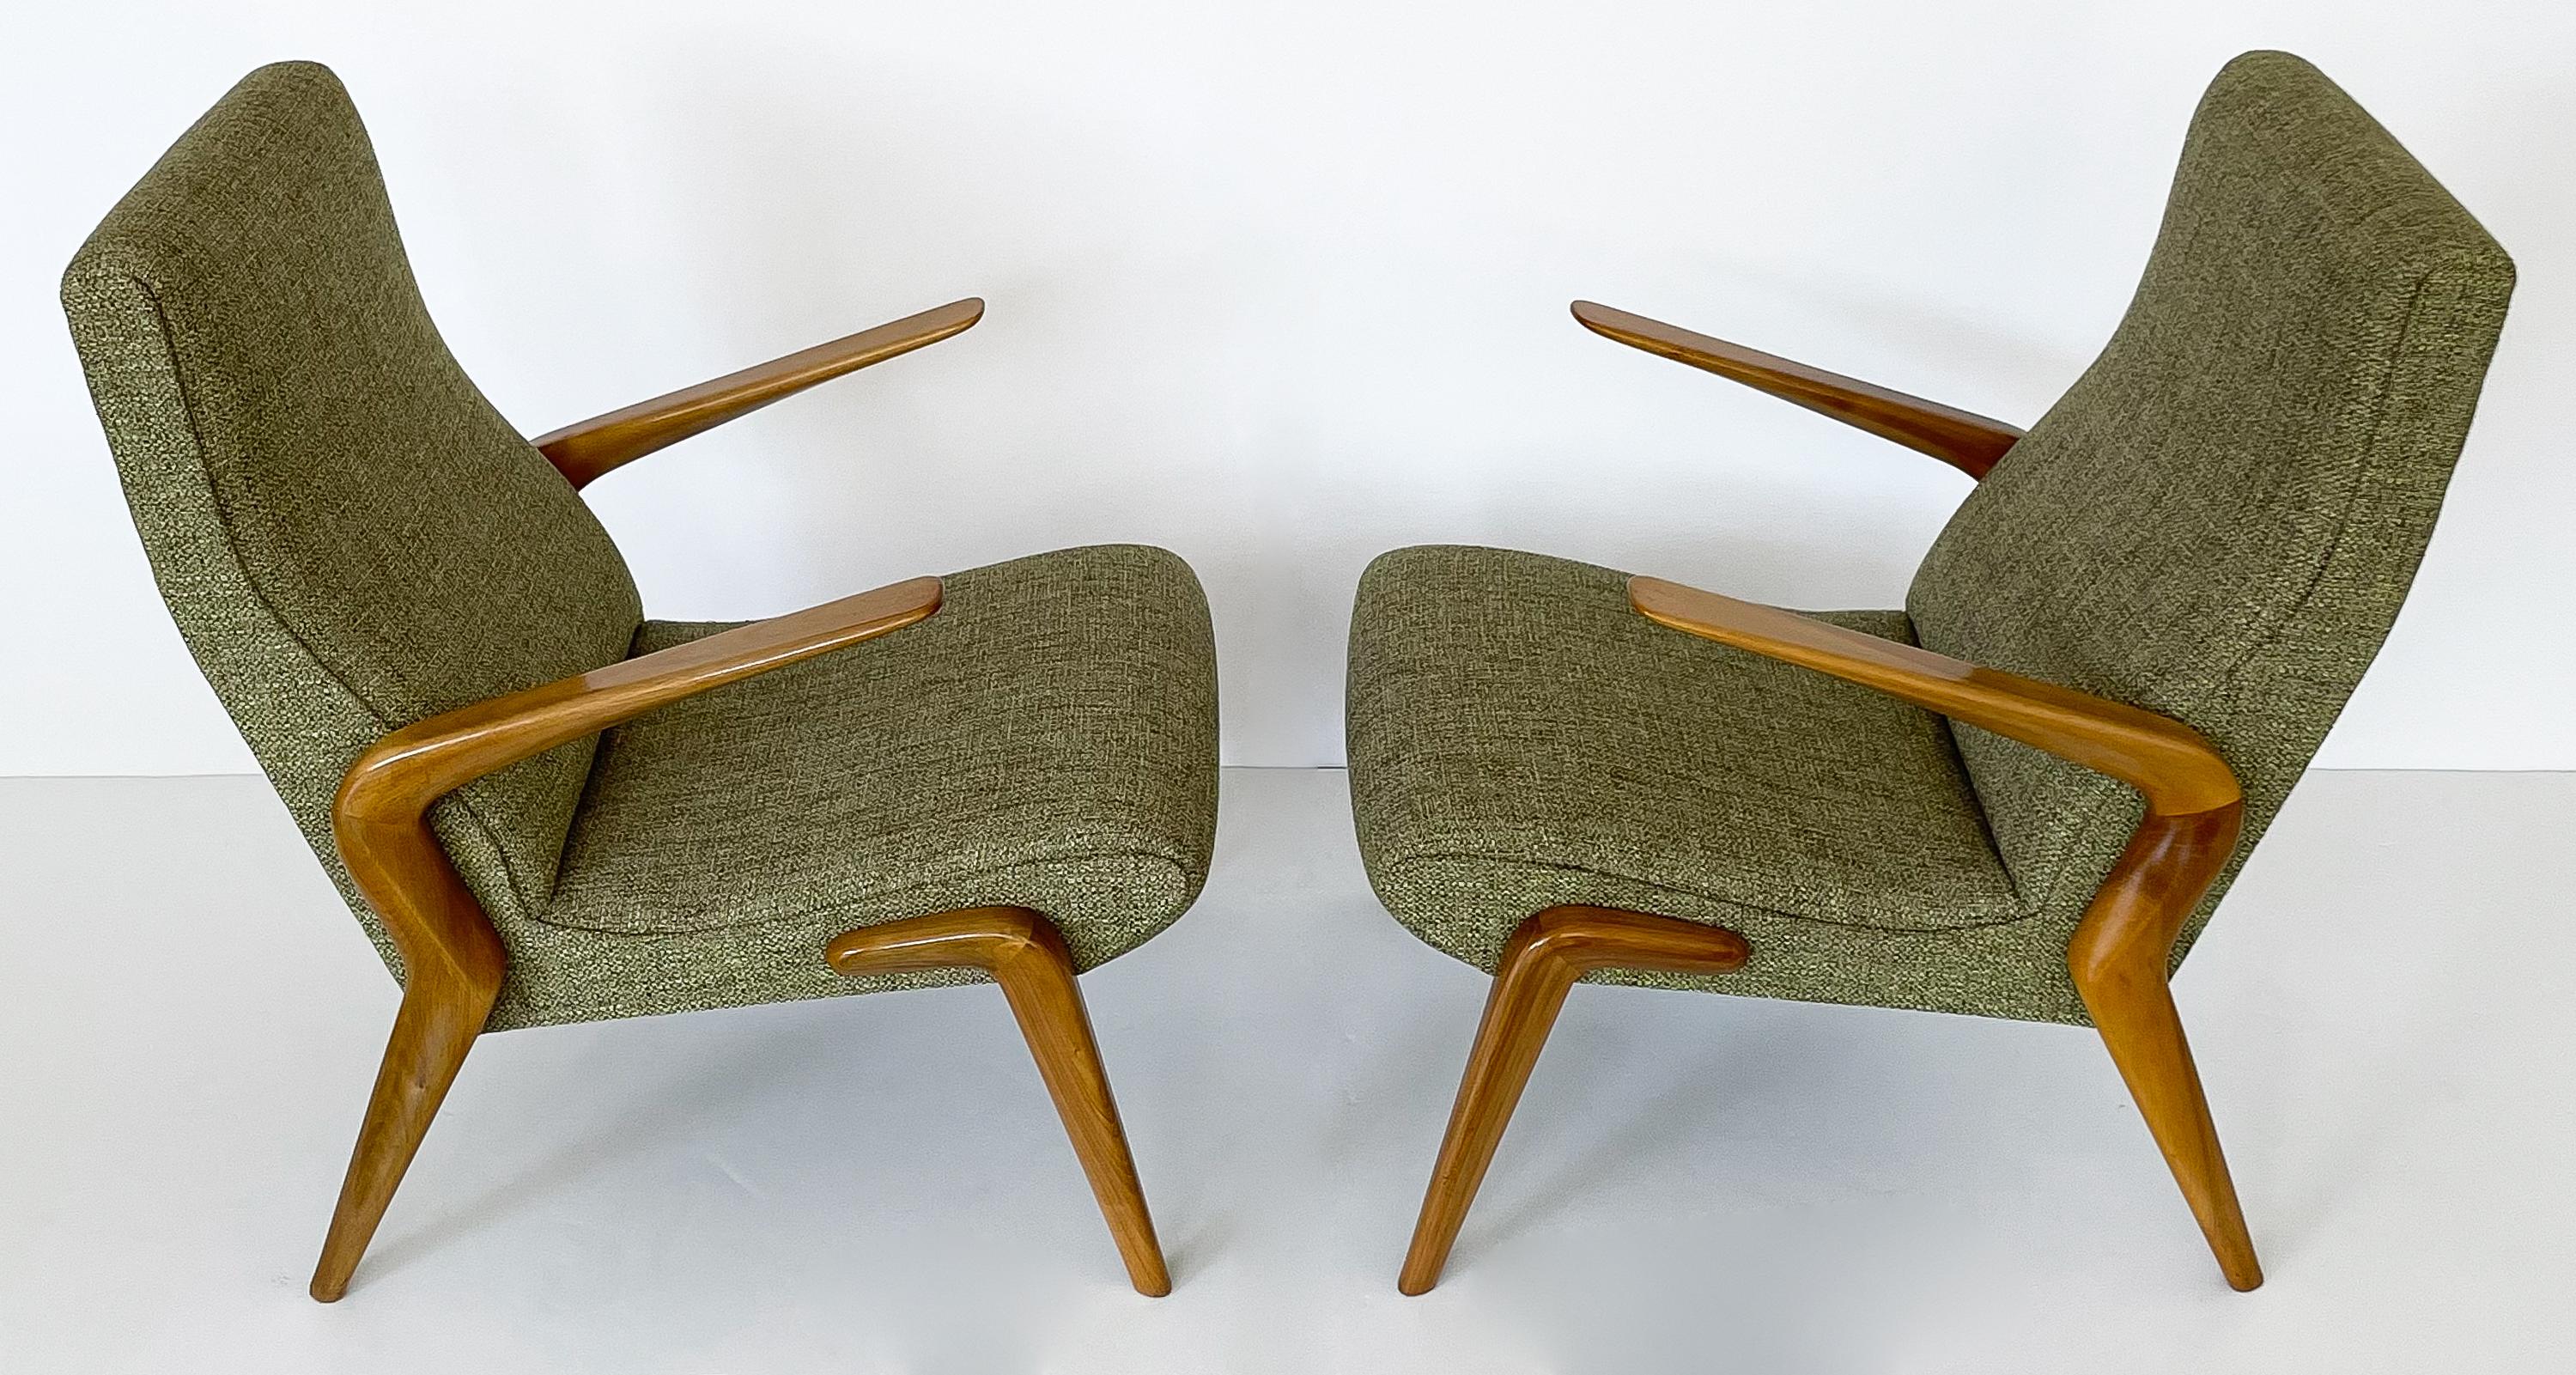 Rare and important pair of Osvaldo Borsani P71 armchairs in Italian walnut and produced by his company, Tecno, Italy. Designed in 1954 the P71 chair was one of the first designs produced by Tecno and was exhibited at the Milan Triennale in 1954.